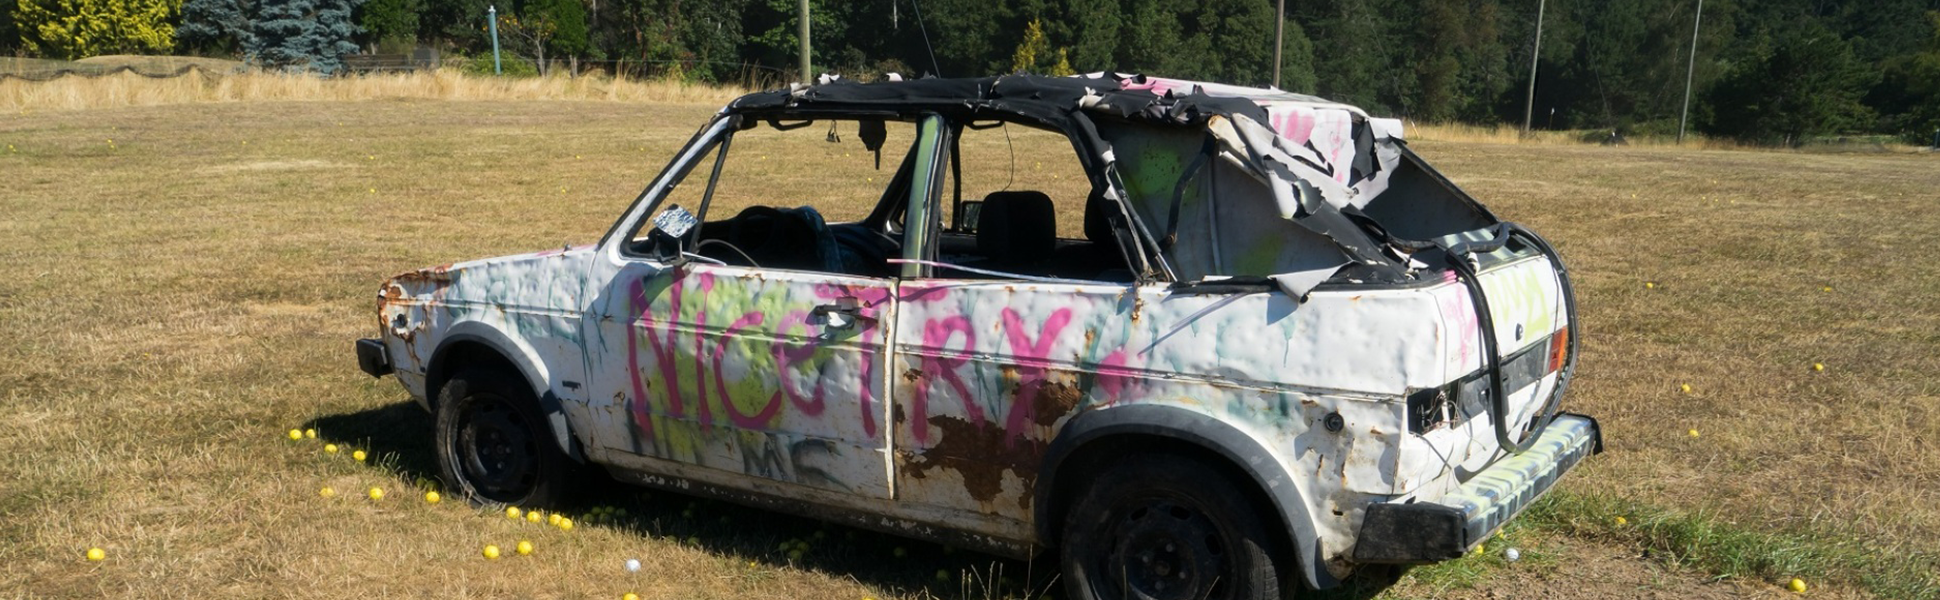 old car with graffiti on it